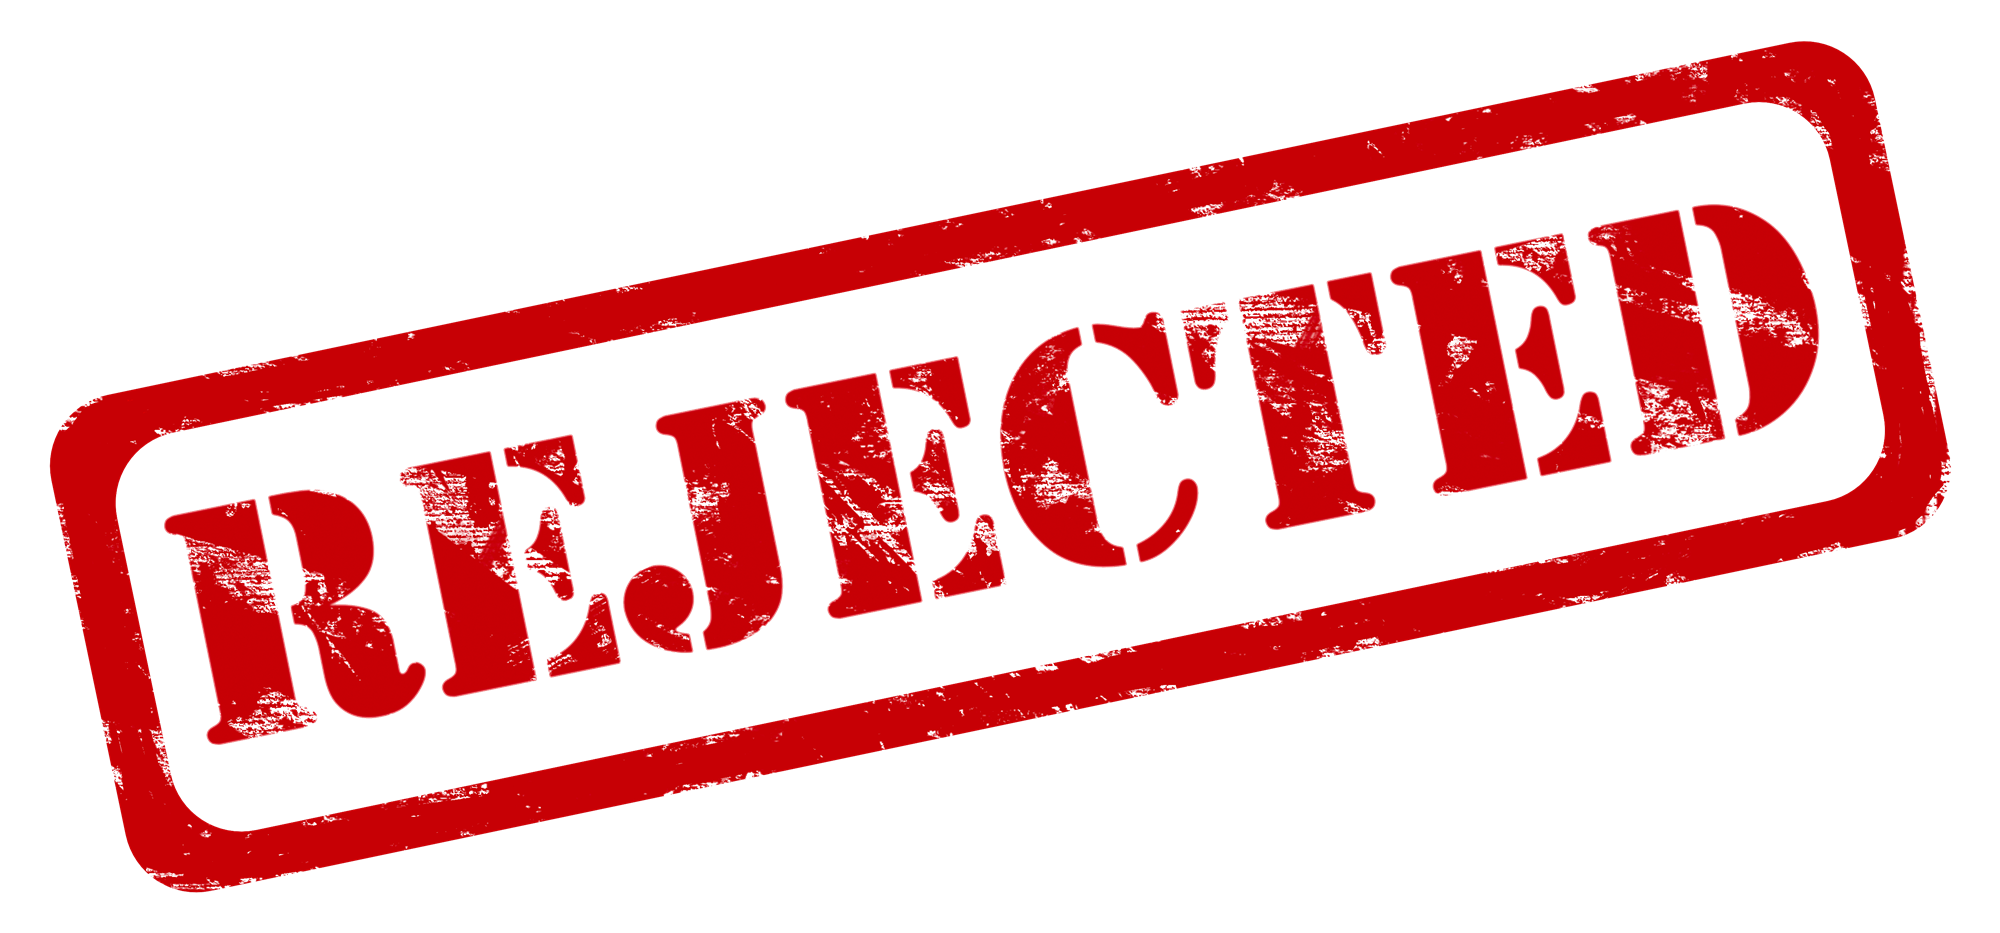 Download Rejected Stamp Png Images Transparent Gallery. Advertisement - Rejected Stamp, Transparent background PNG HD thumbnail